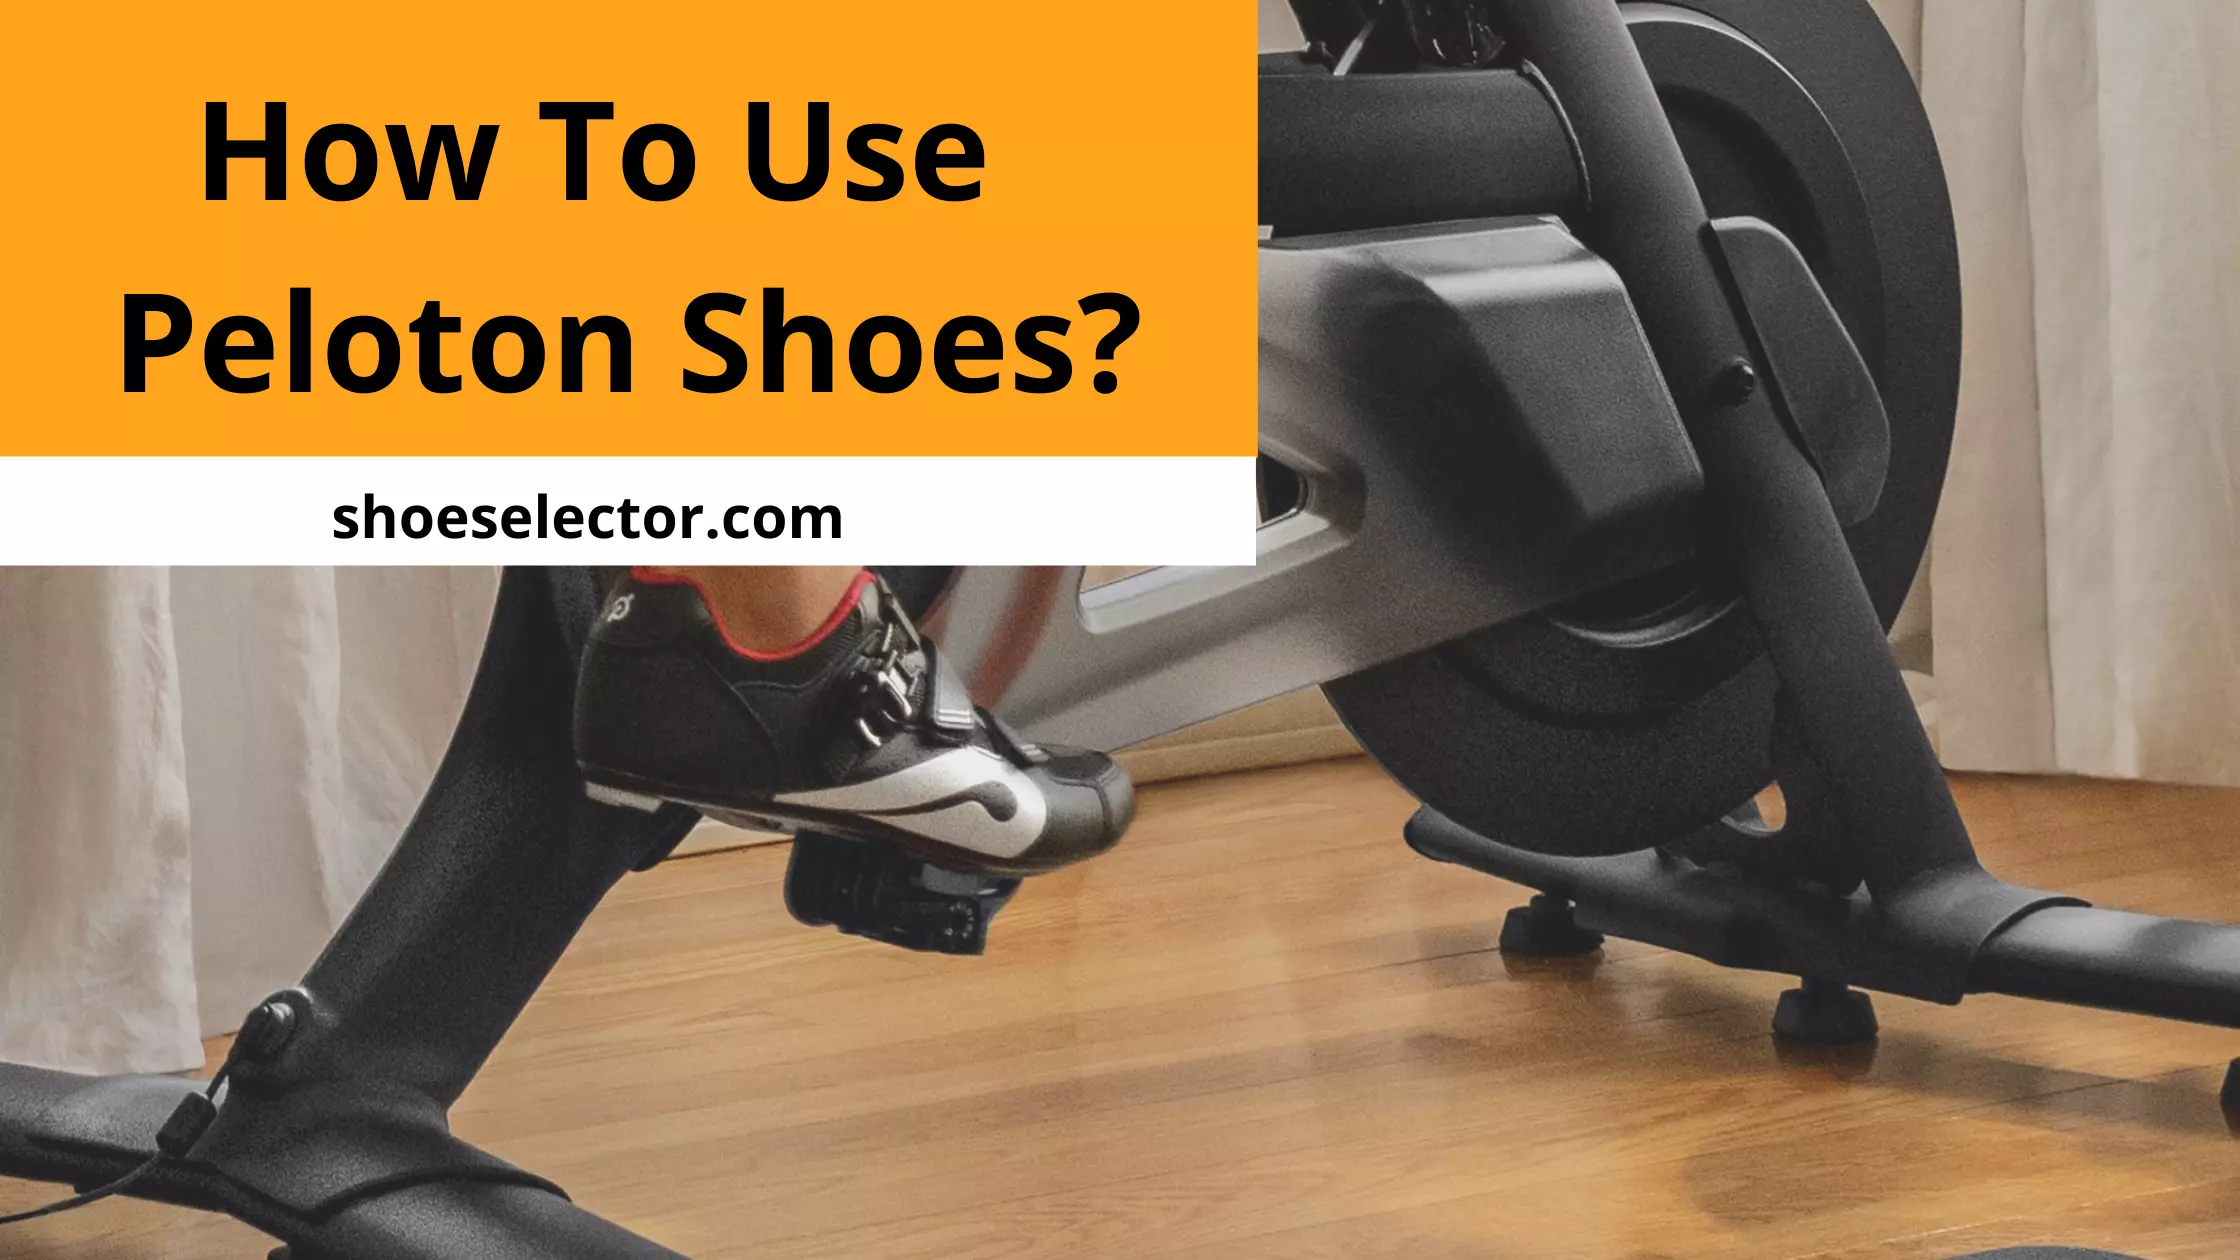 How To Use Peloton Shoes? Simple Steps You Can Try